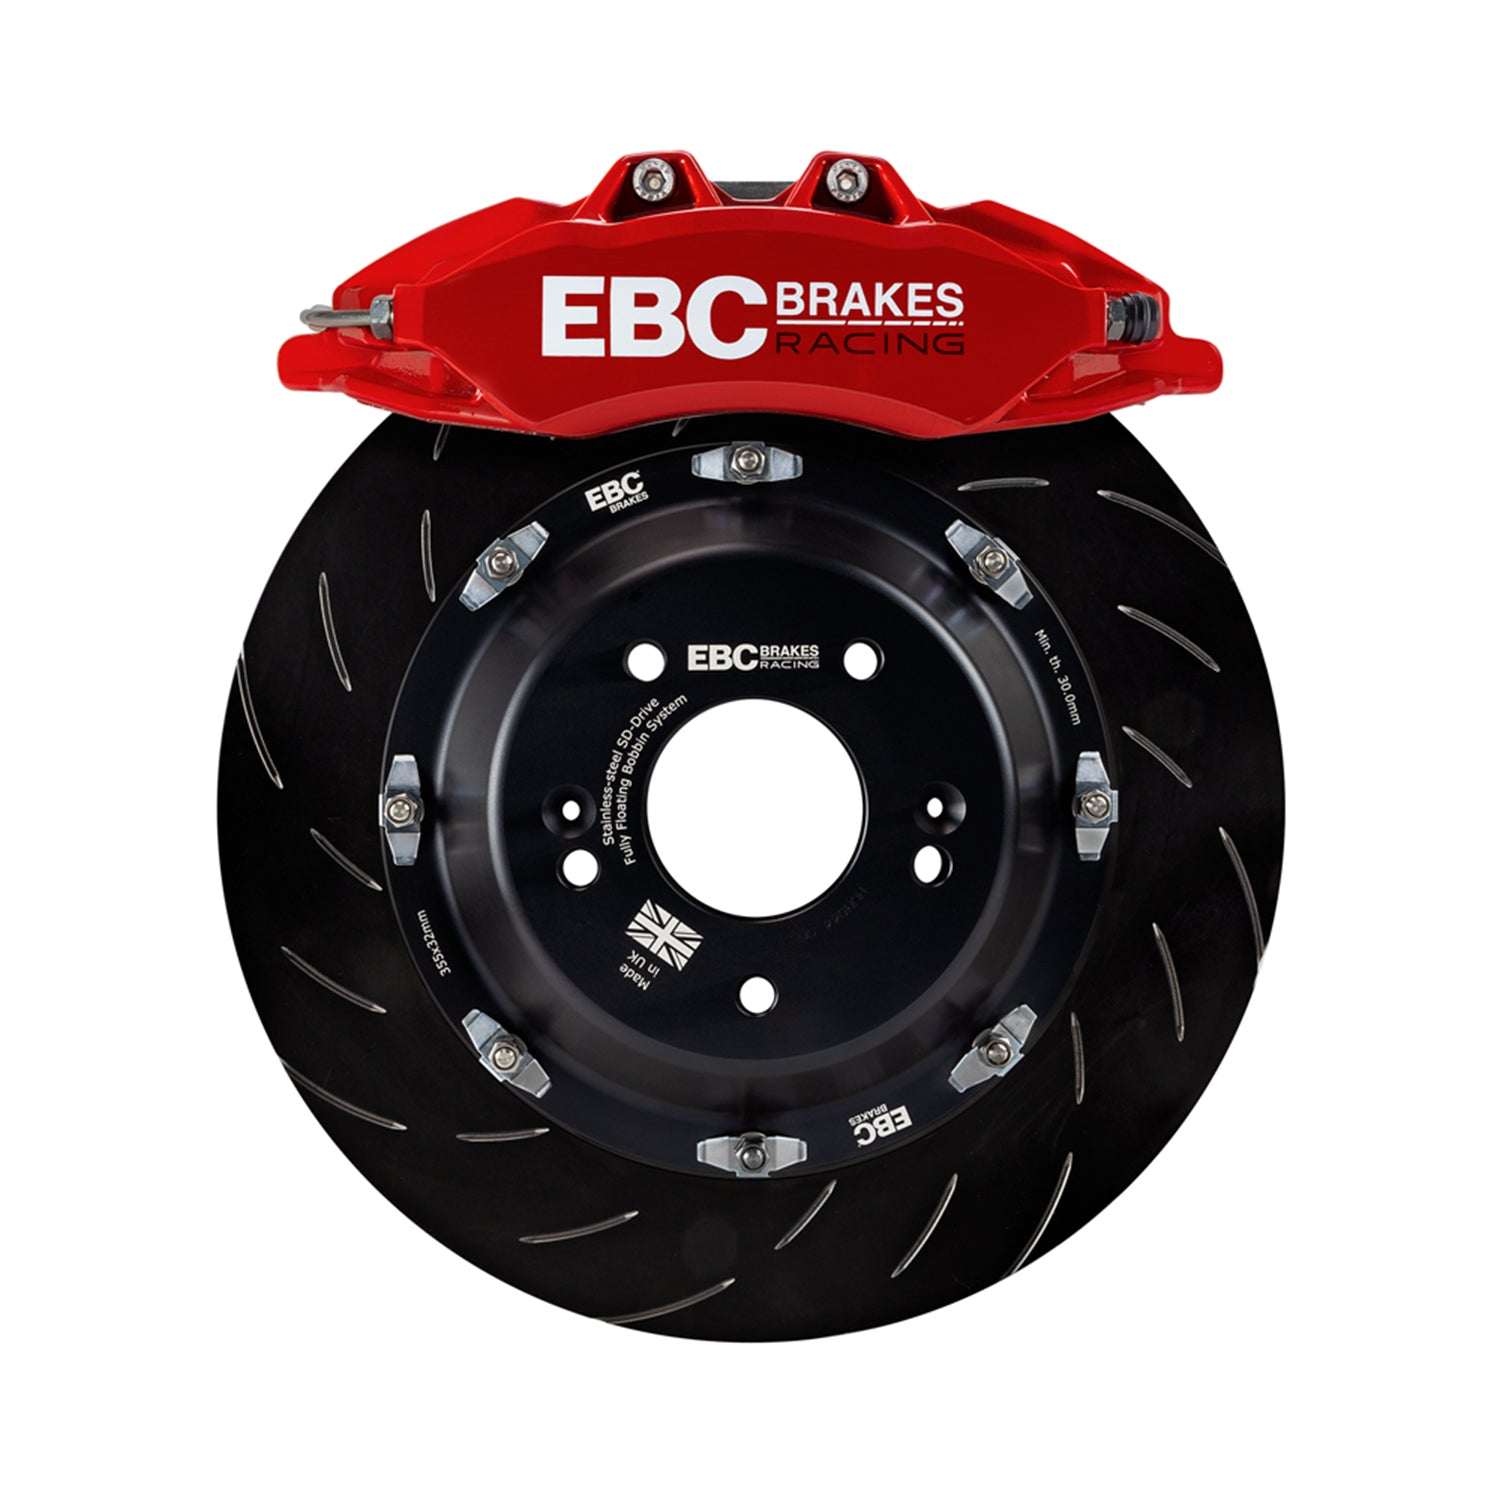 EBC Racing Big Brake Kit For BMW F80 M3, F82 M4 & F87 M2 In Red